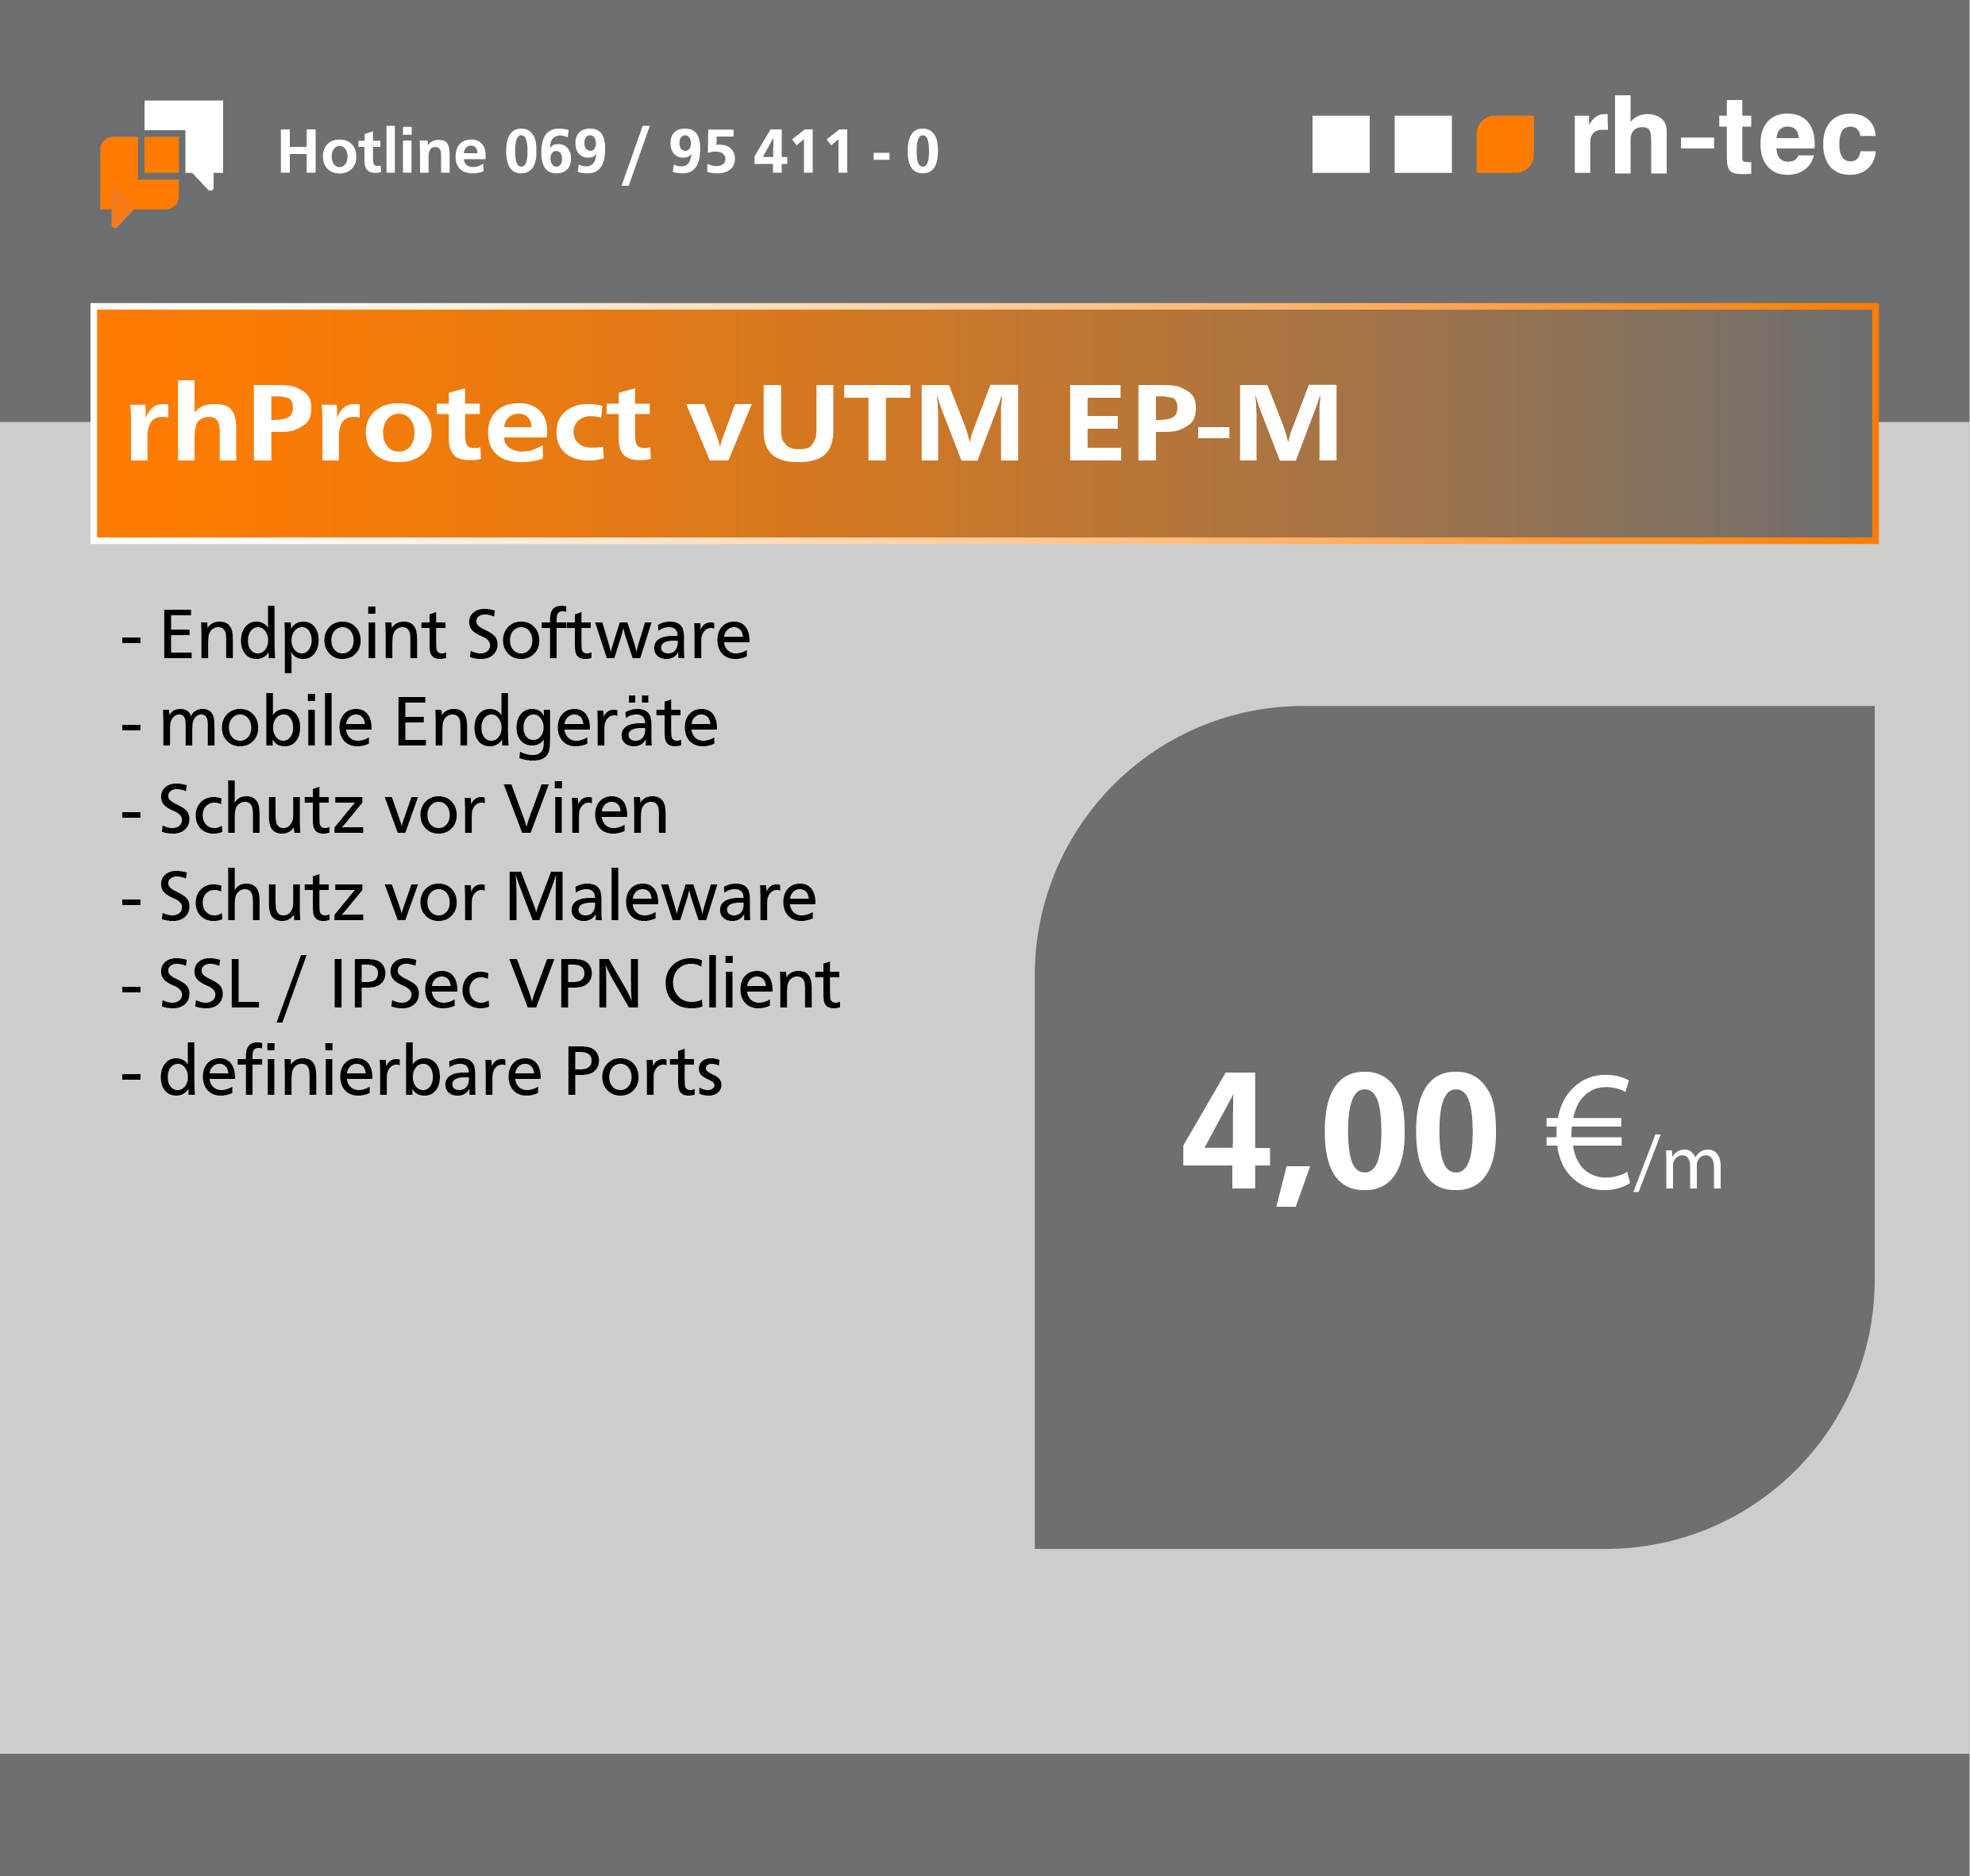 rhProtect vUTM EP-M